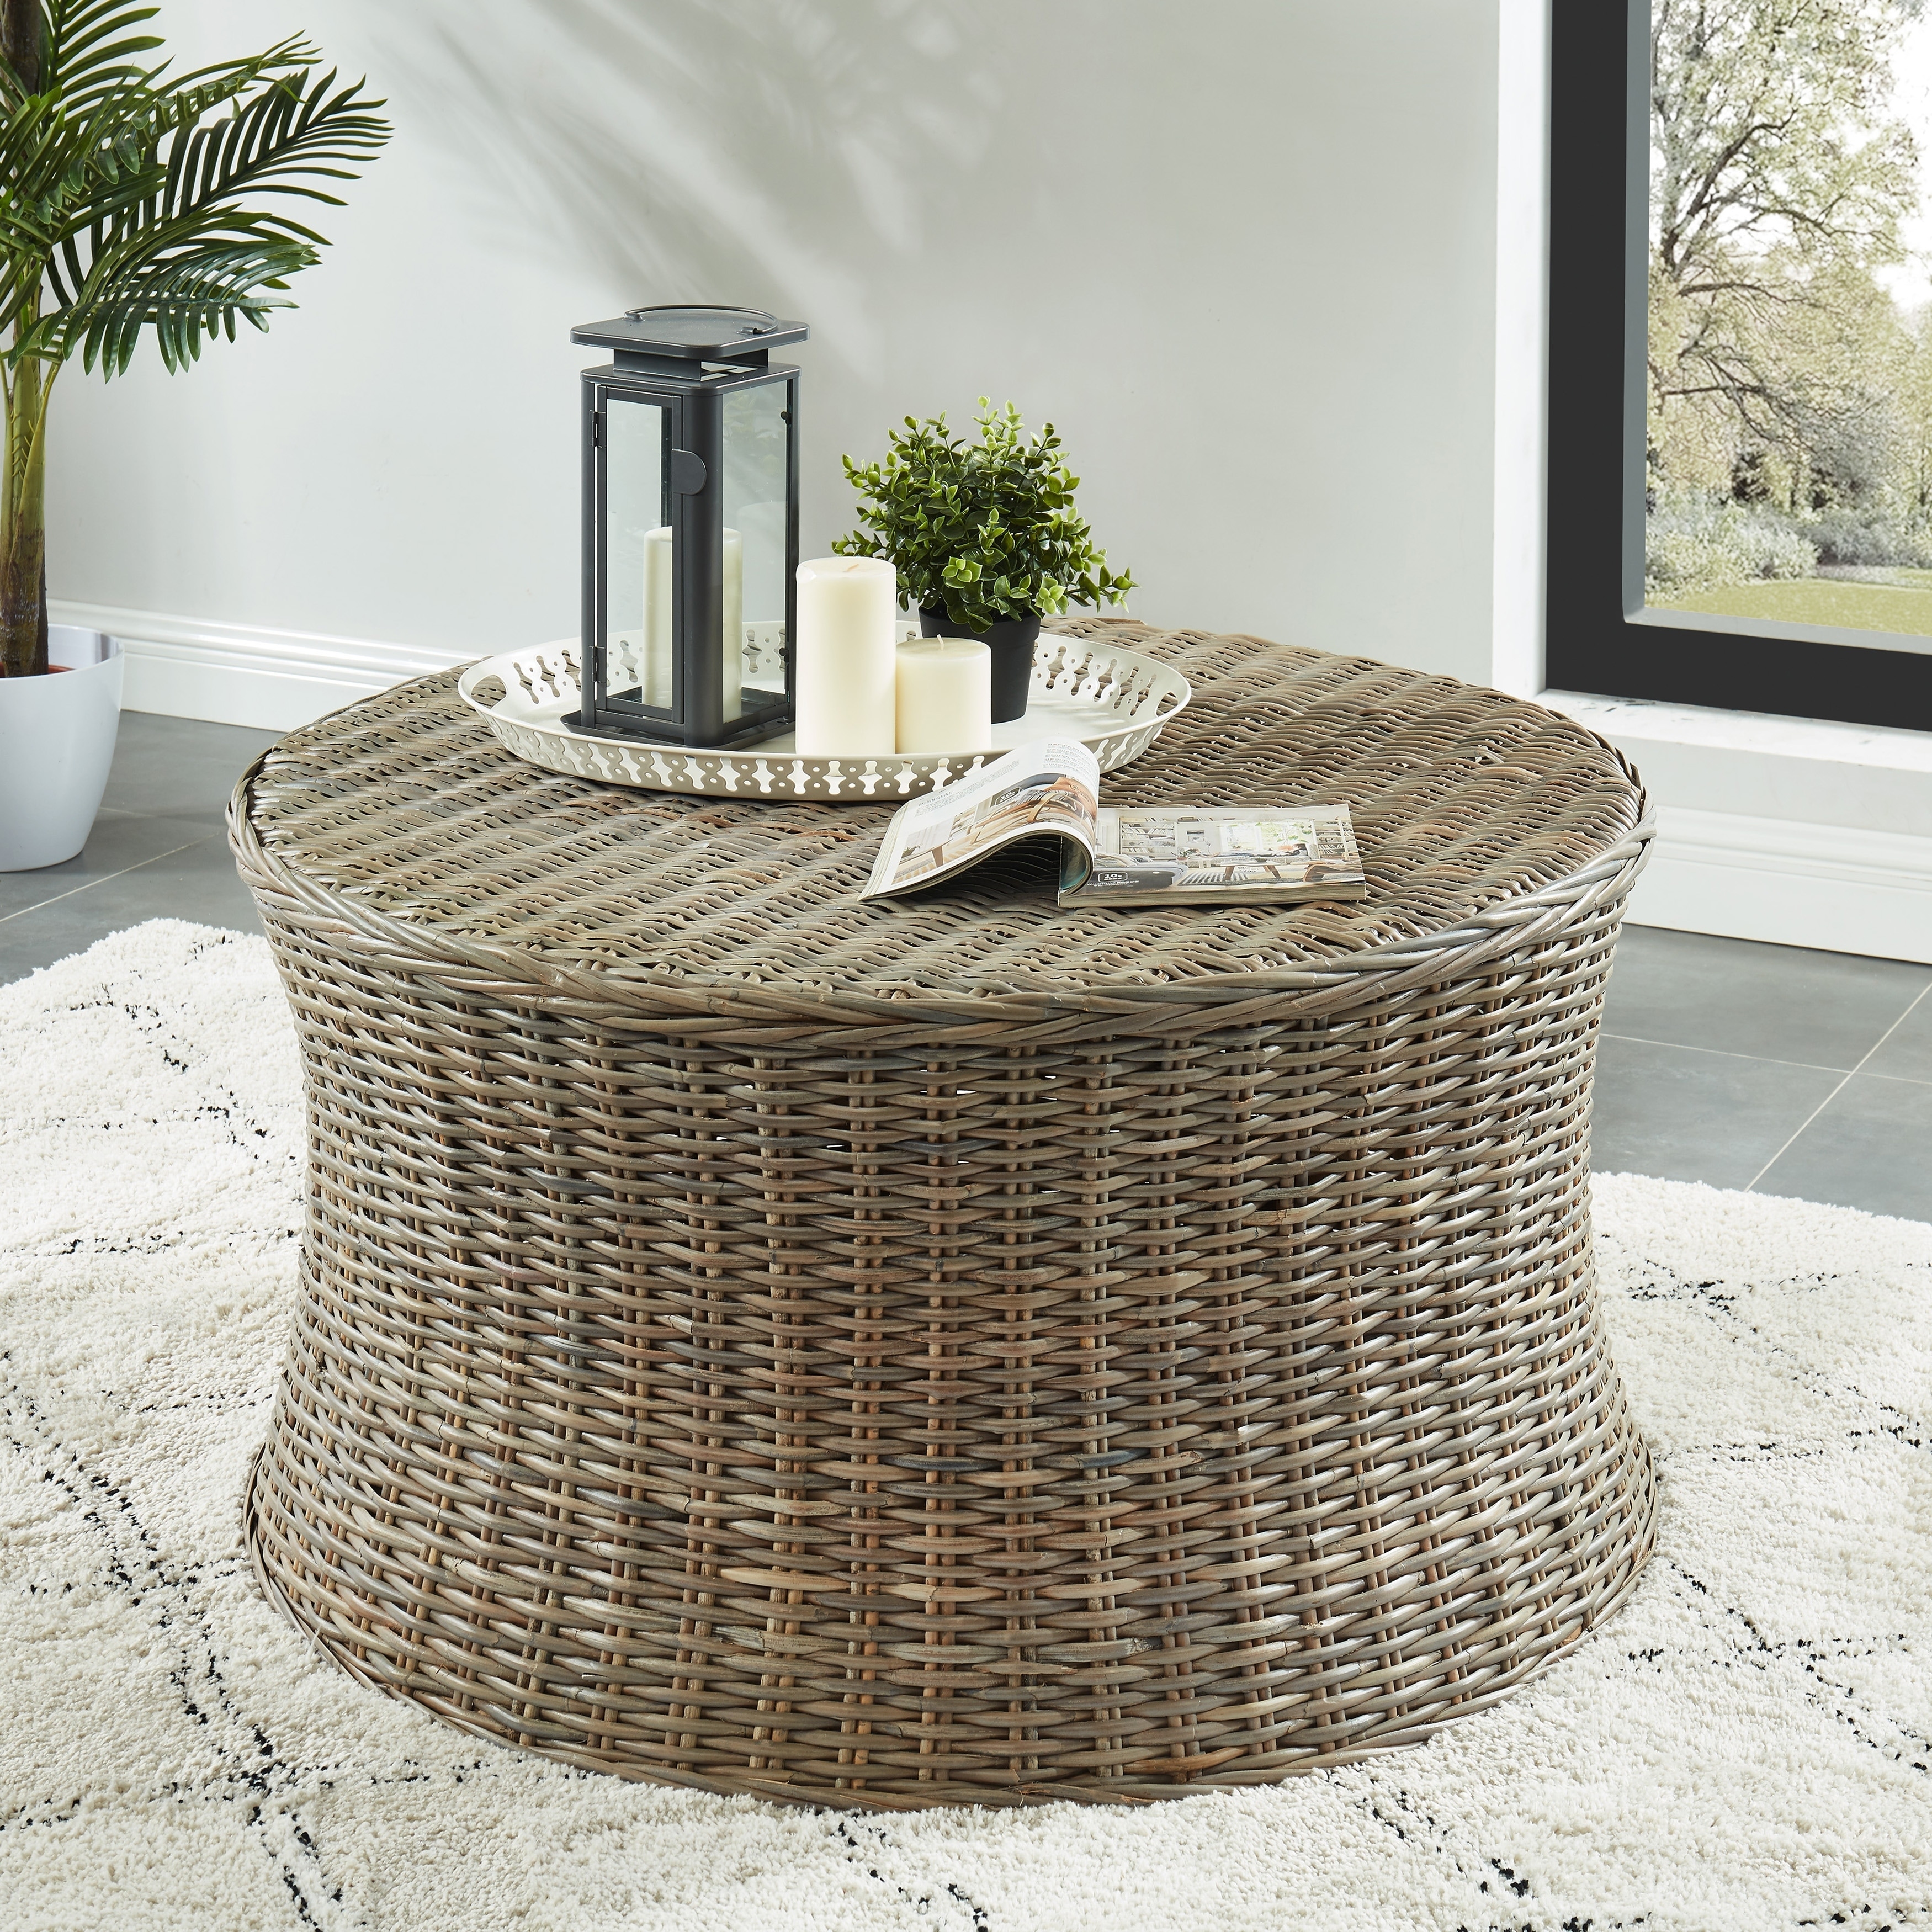 Dmig Catalogue 39 Round Rattan Coffee Table With Storage